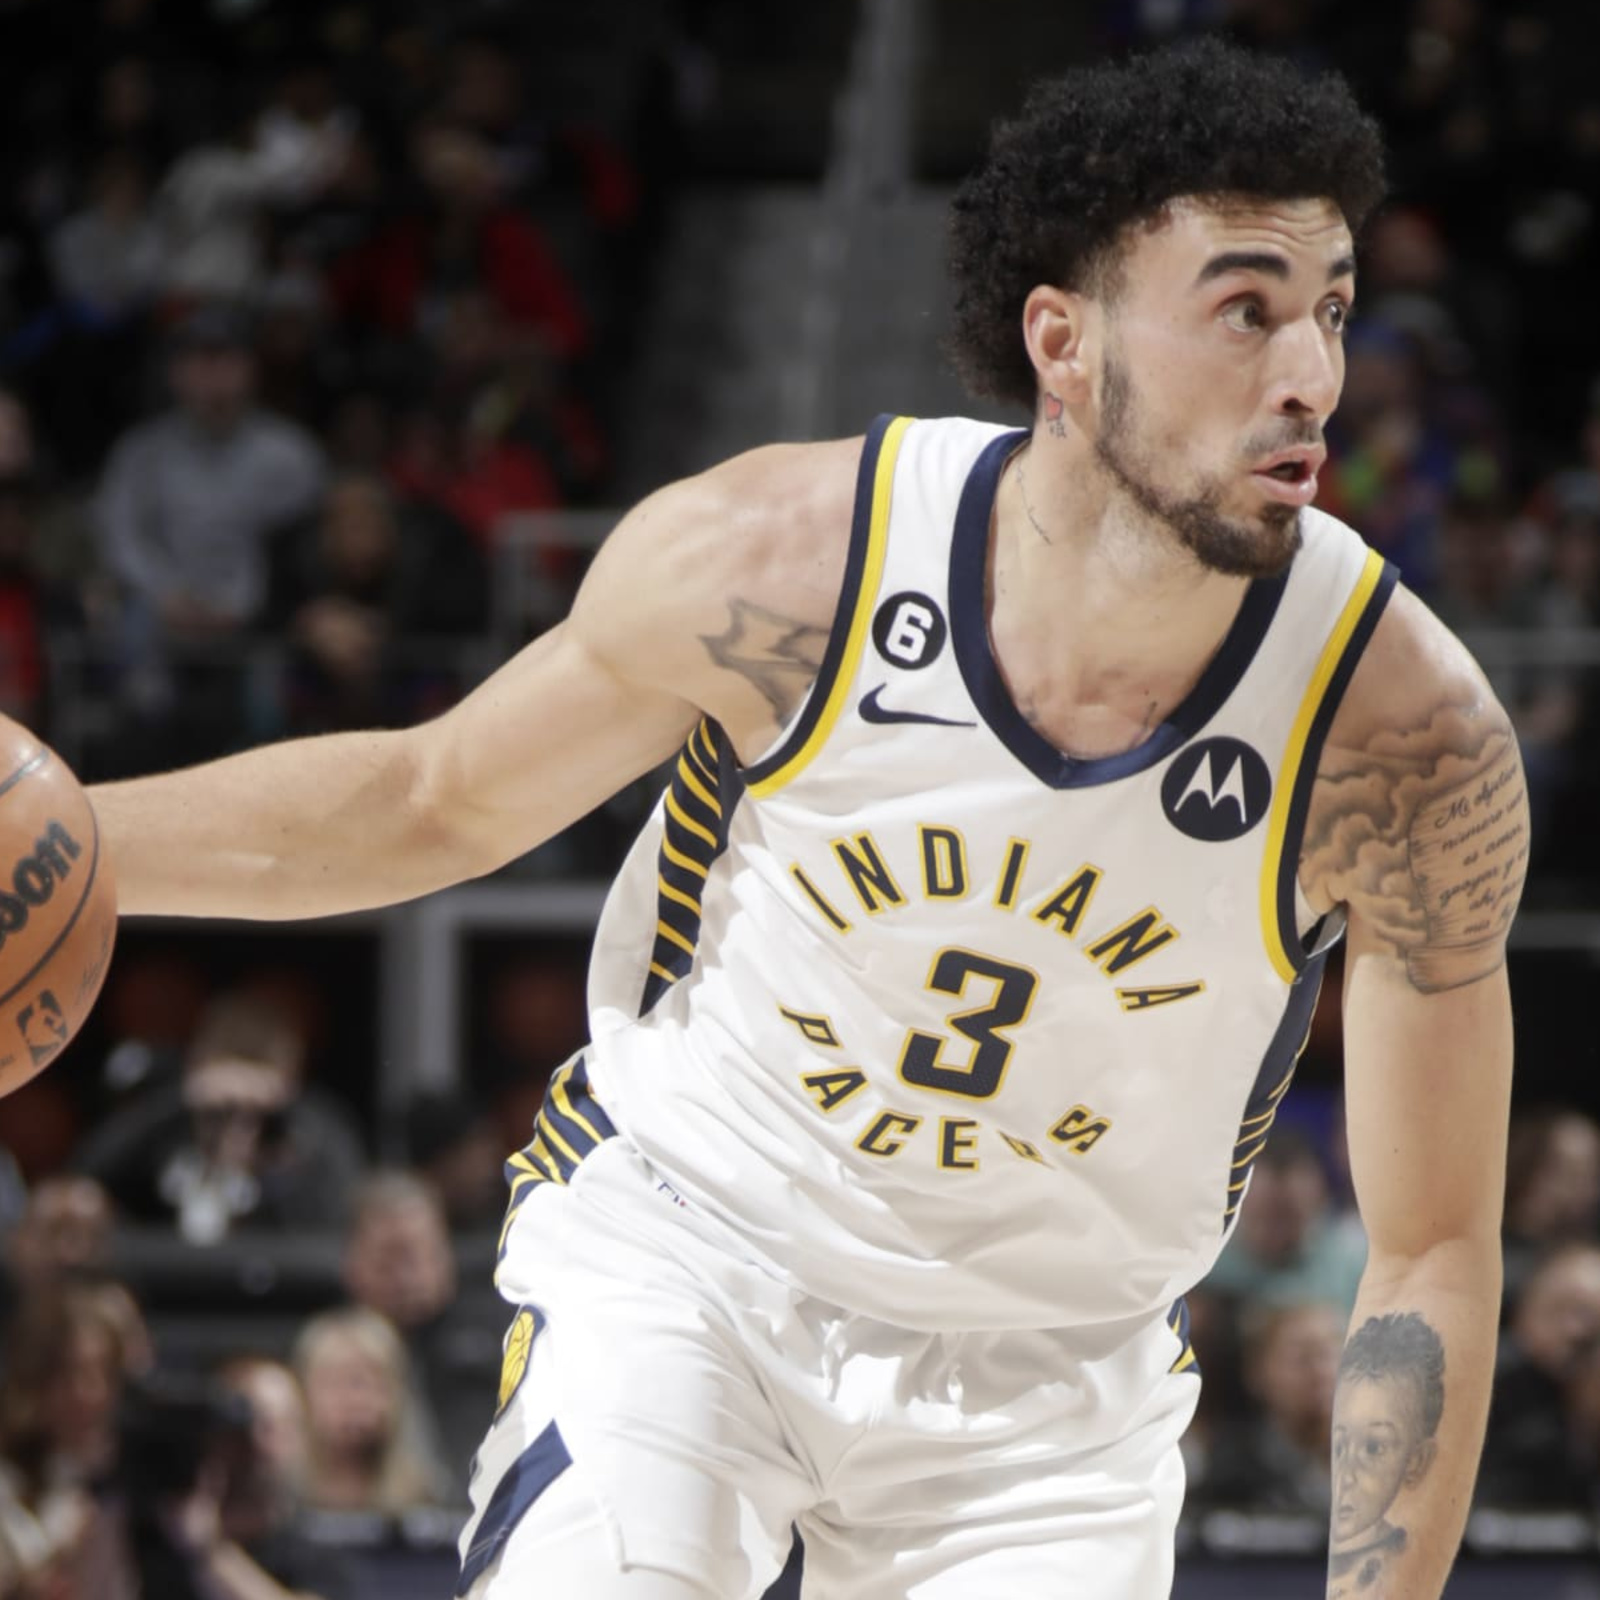 Chris Duarte was surprised by trade from Indiana Pacers, excited